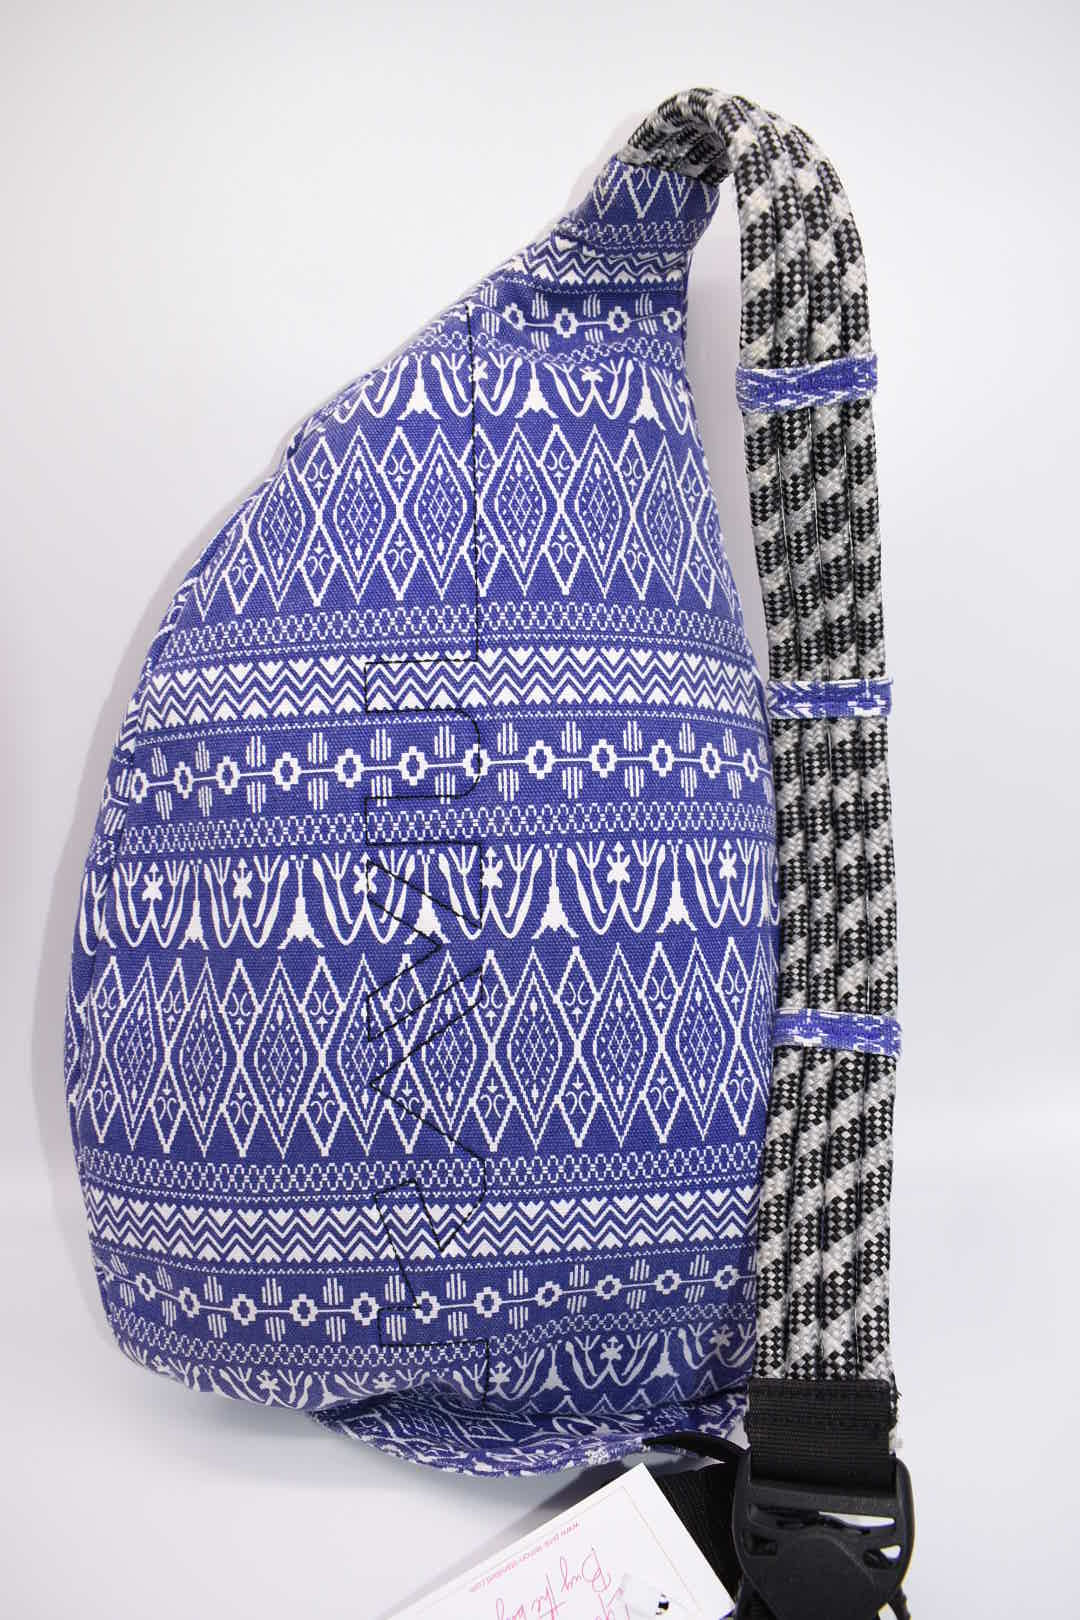 Kavu Canvas Rope Sling Bag in Purple & White